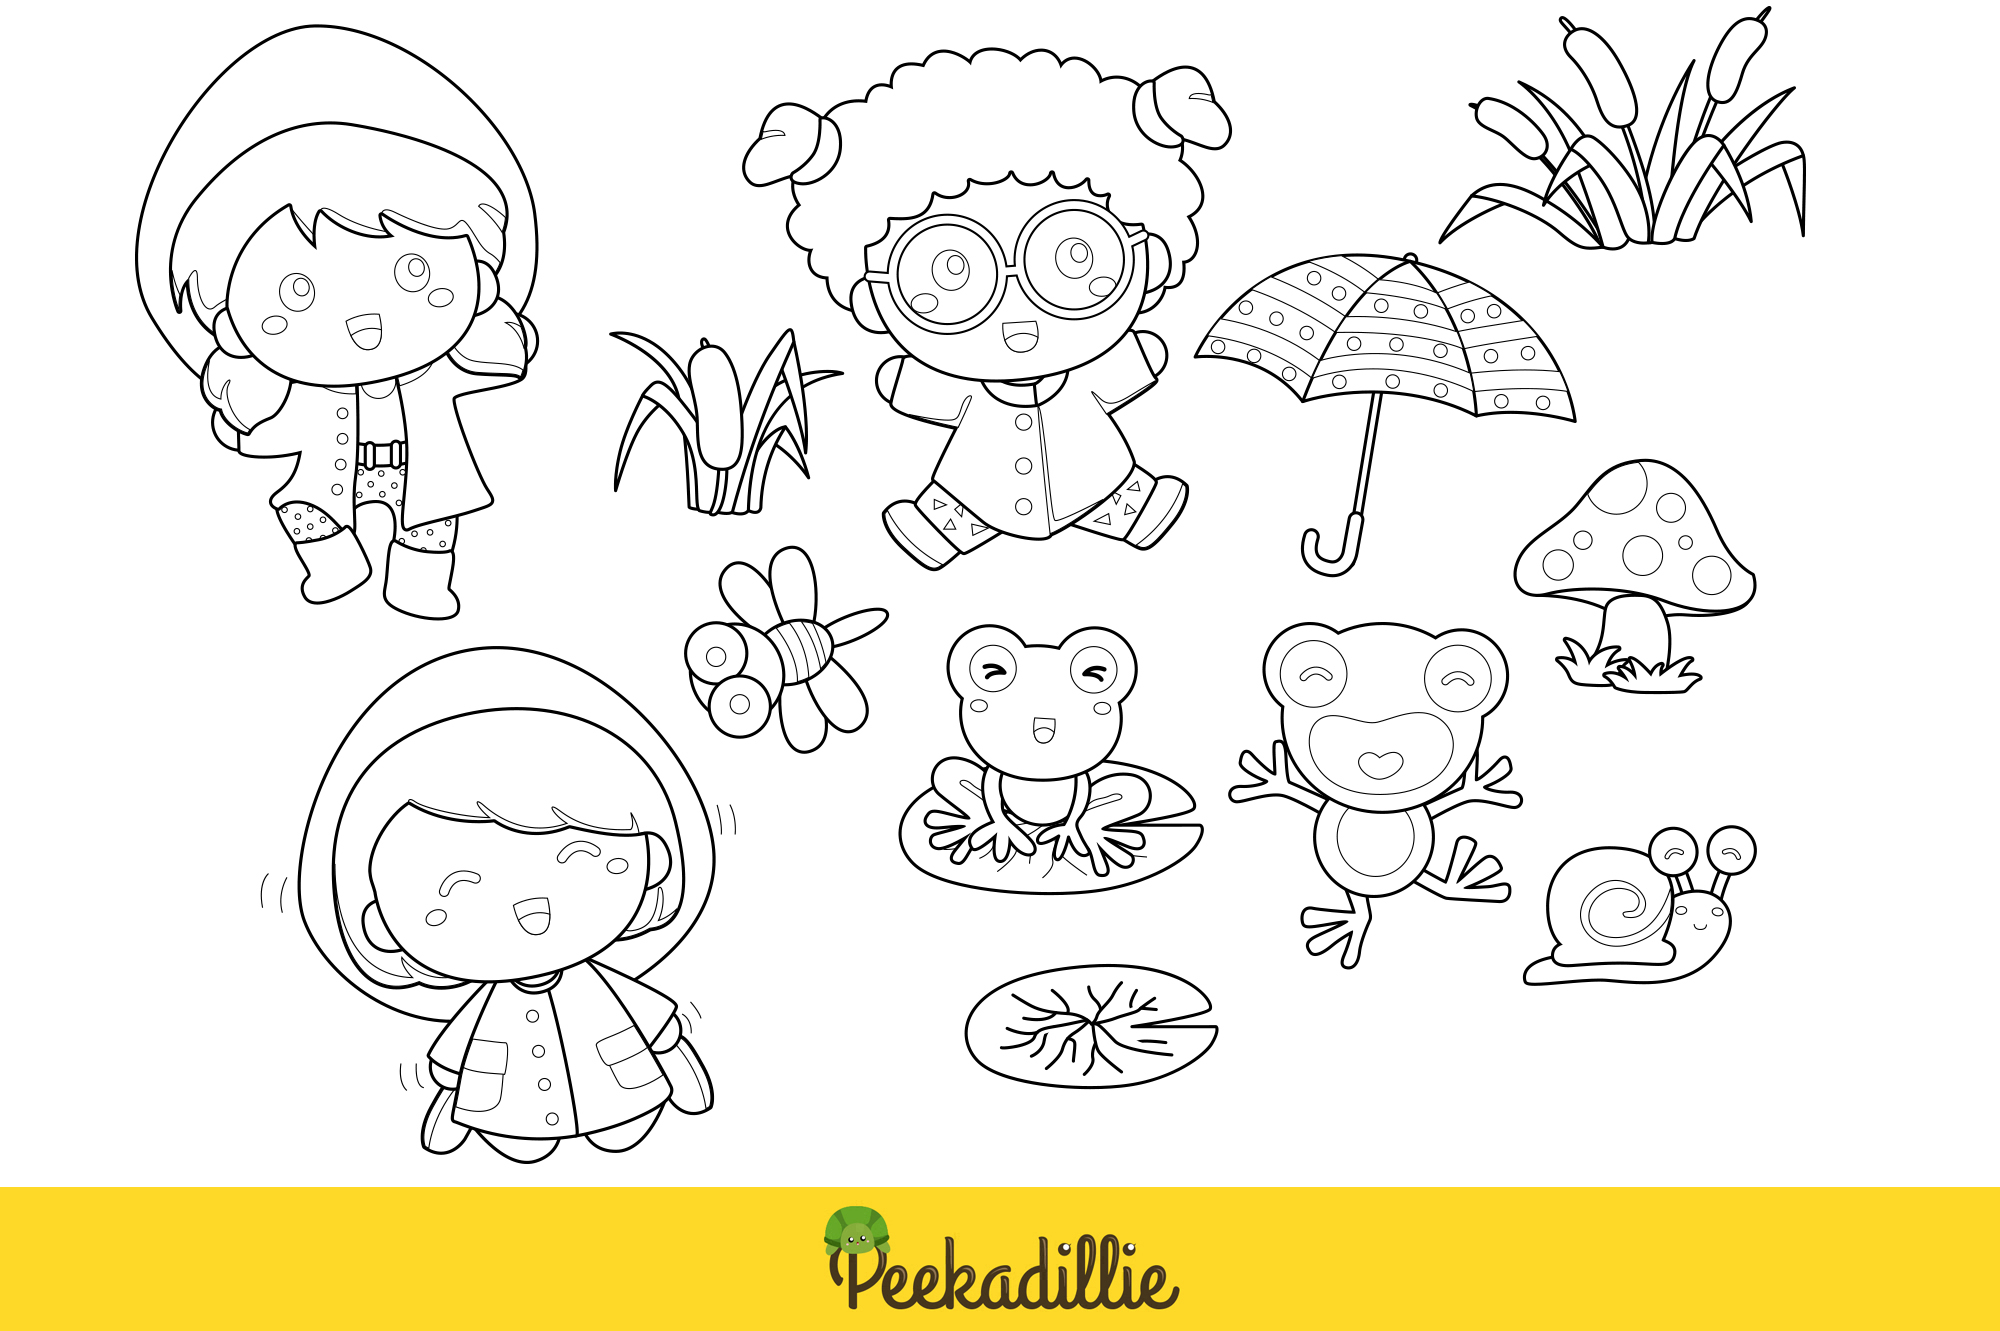 Coloring page with a girl and boy in the rain.